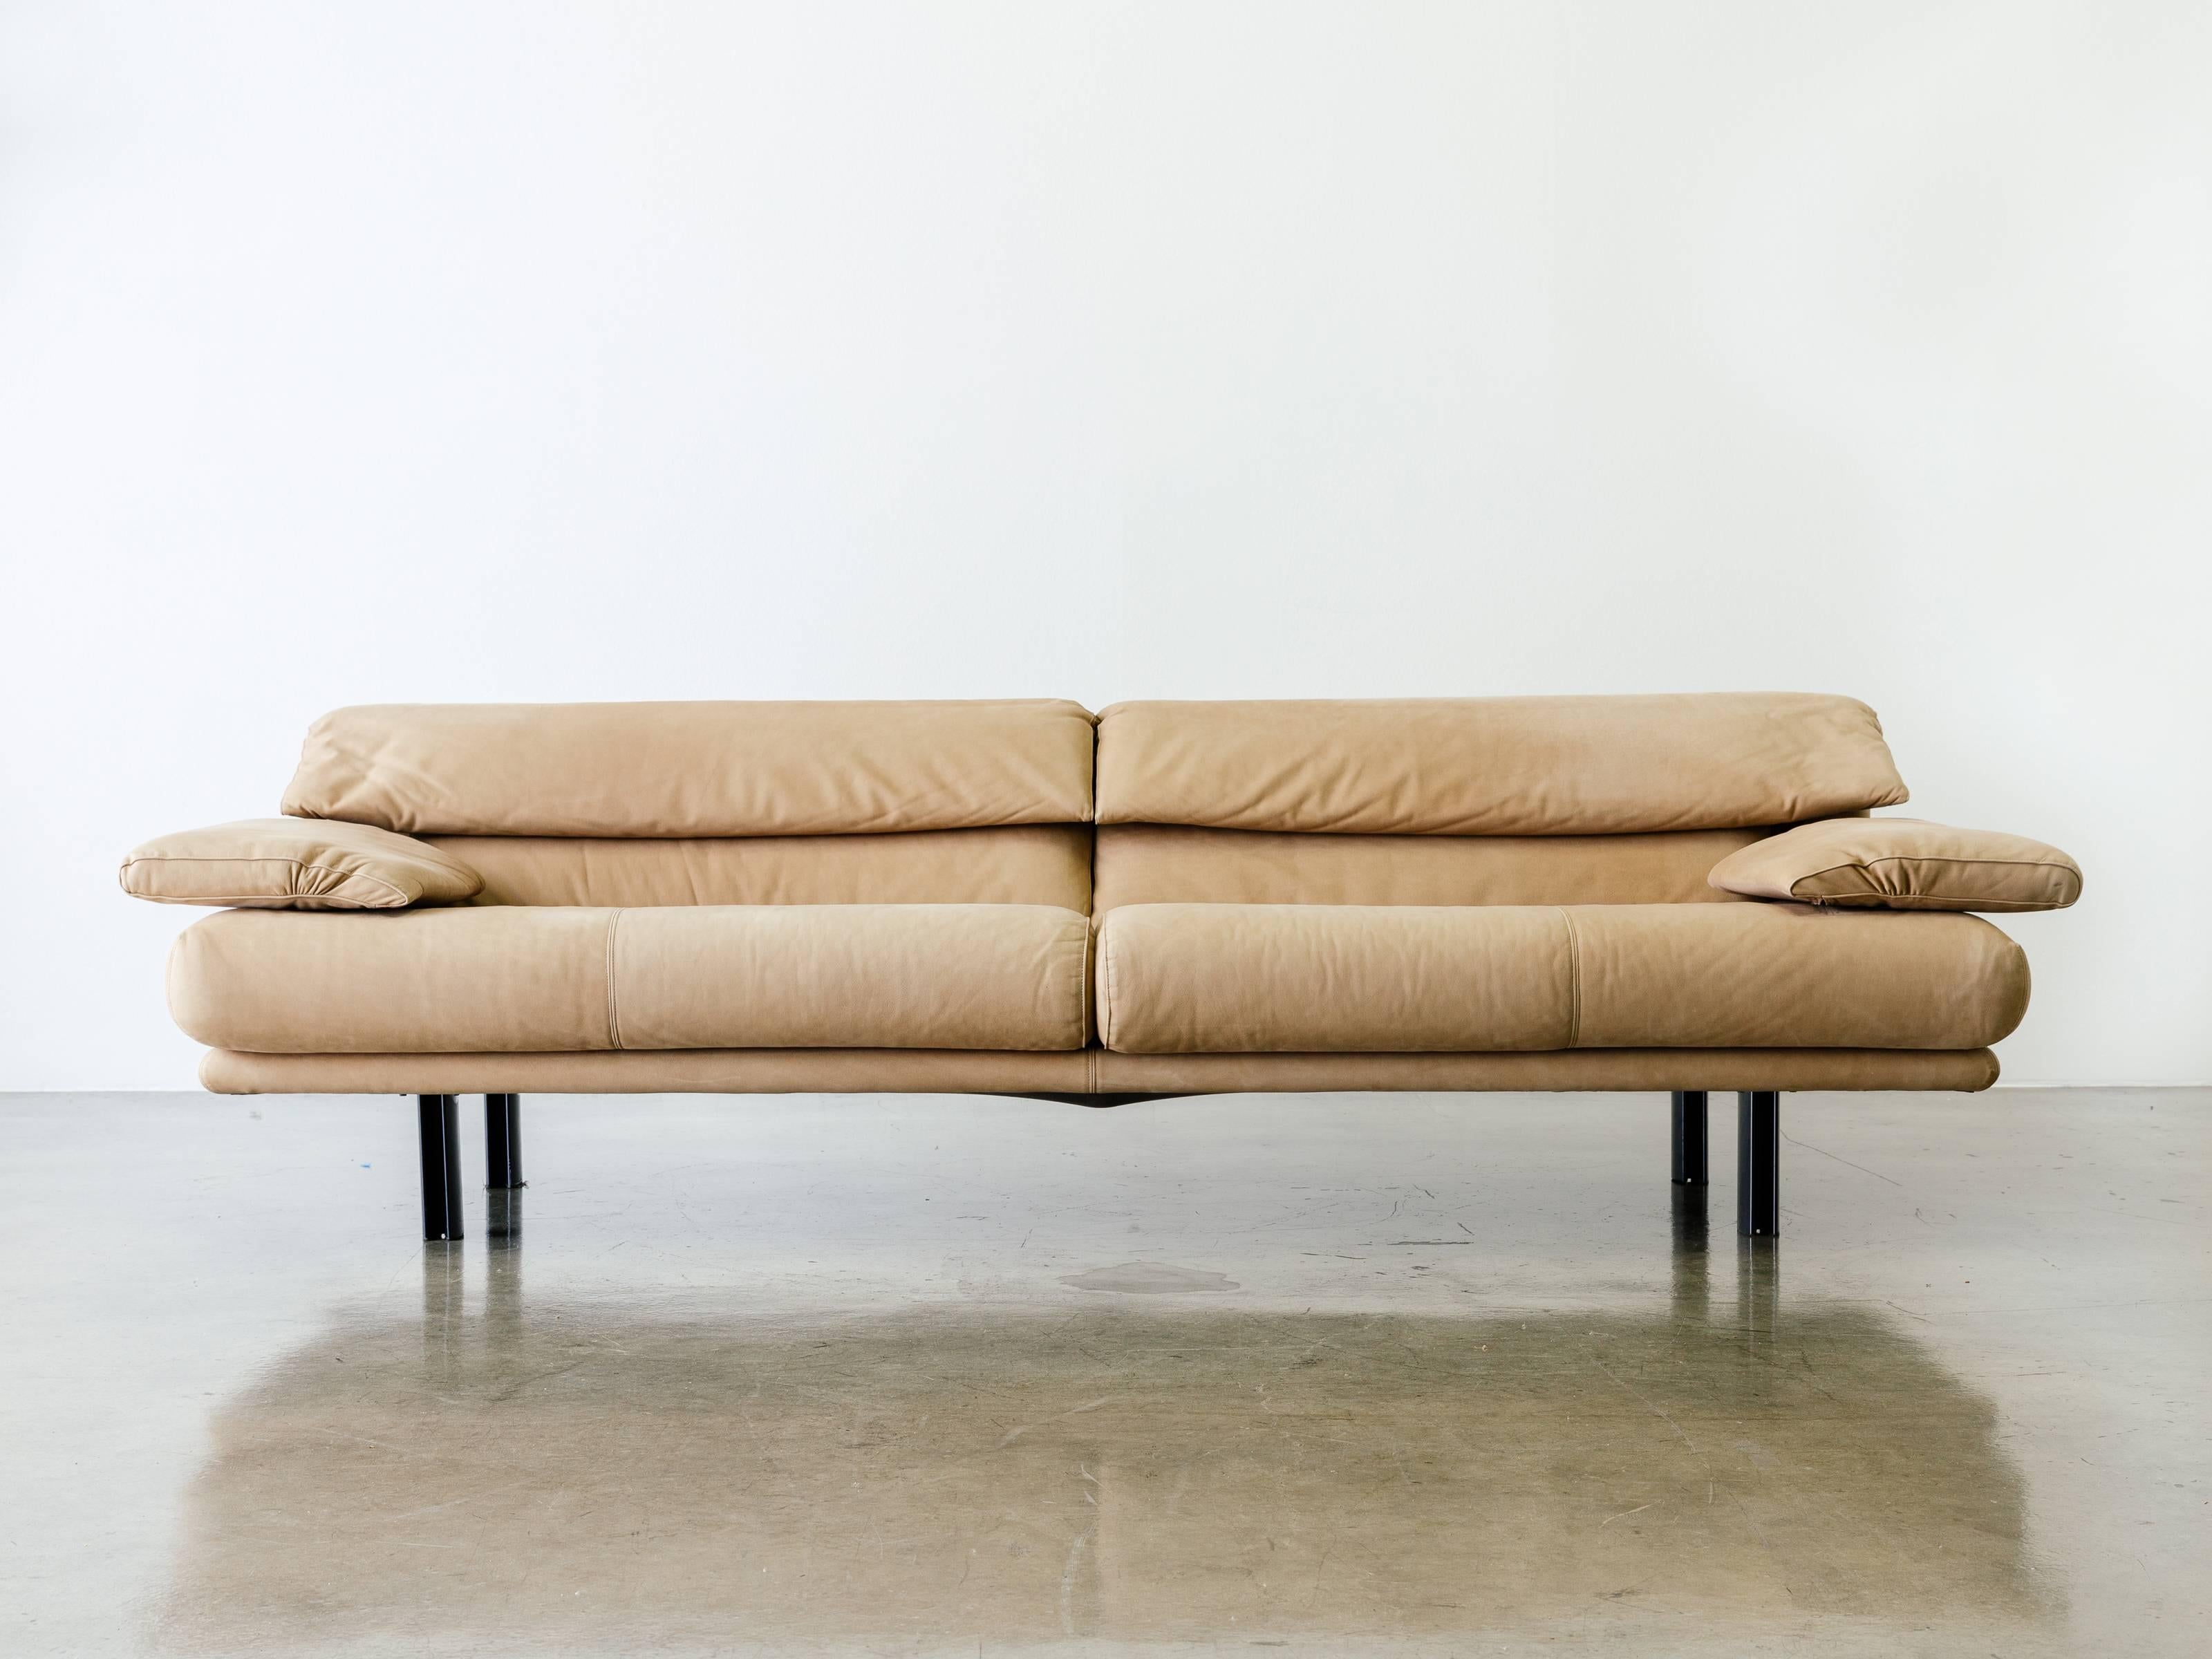 The 'Alanda' sofa designed by Paolo Piva for B&B Italia in 1980. The R&D division of the company developed a patented adjustment mechanism that allows for fluid adjustment and positioning of the moveable backs and arms. Covered in the beautiful